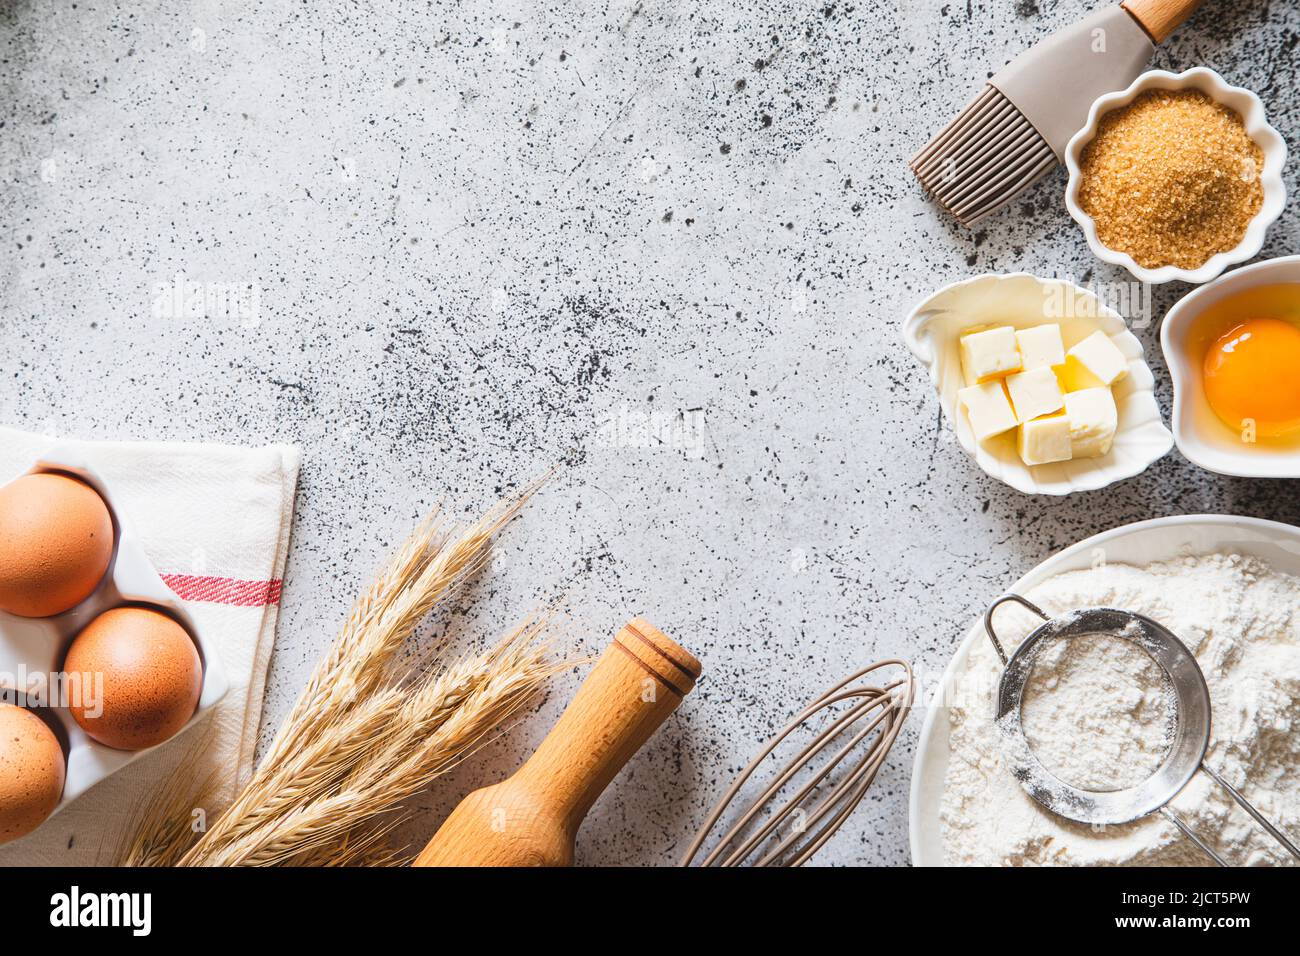 Concept Baking Cooking Background Frame Ingredients Kitchen Items Baking  Cakes Stock Photo by ©Zukamilov 206640946